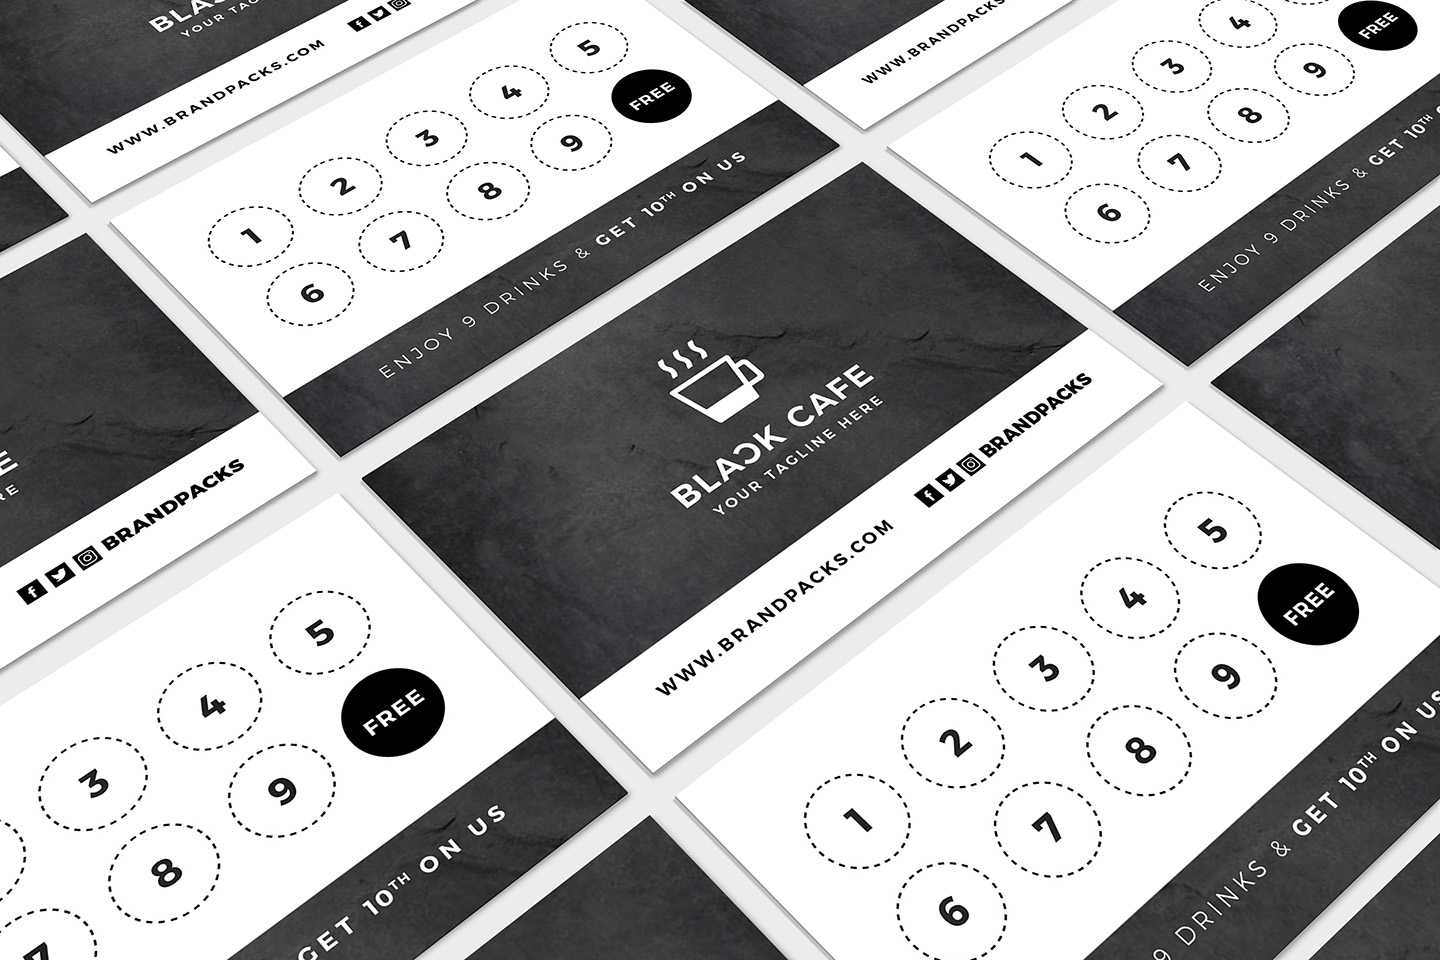 Free Loyalty Card Templates – Psd, Ai & Vector – Brandpacks In Loyalty Card Design Template